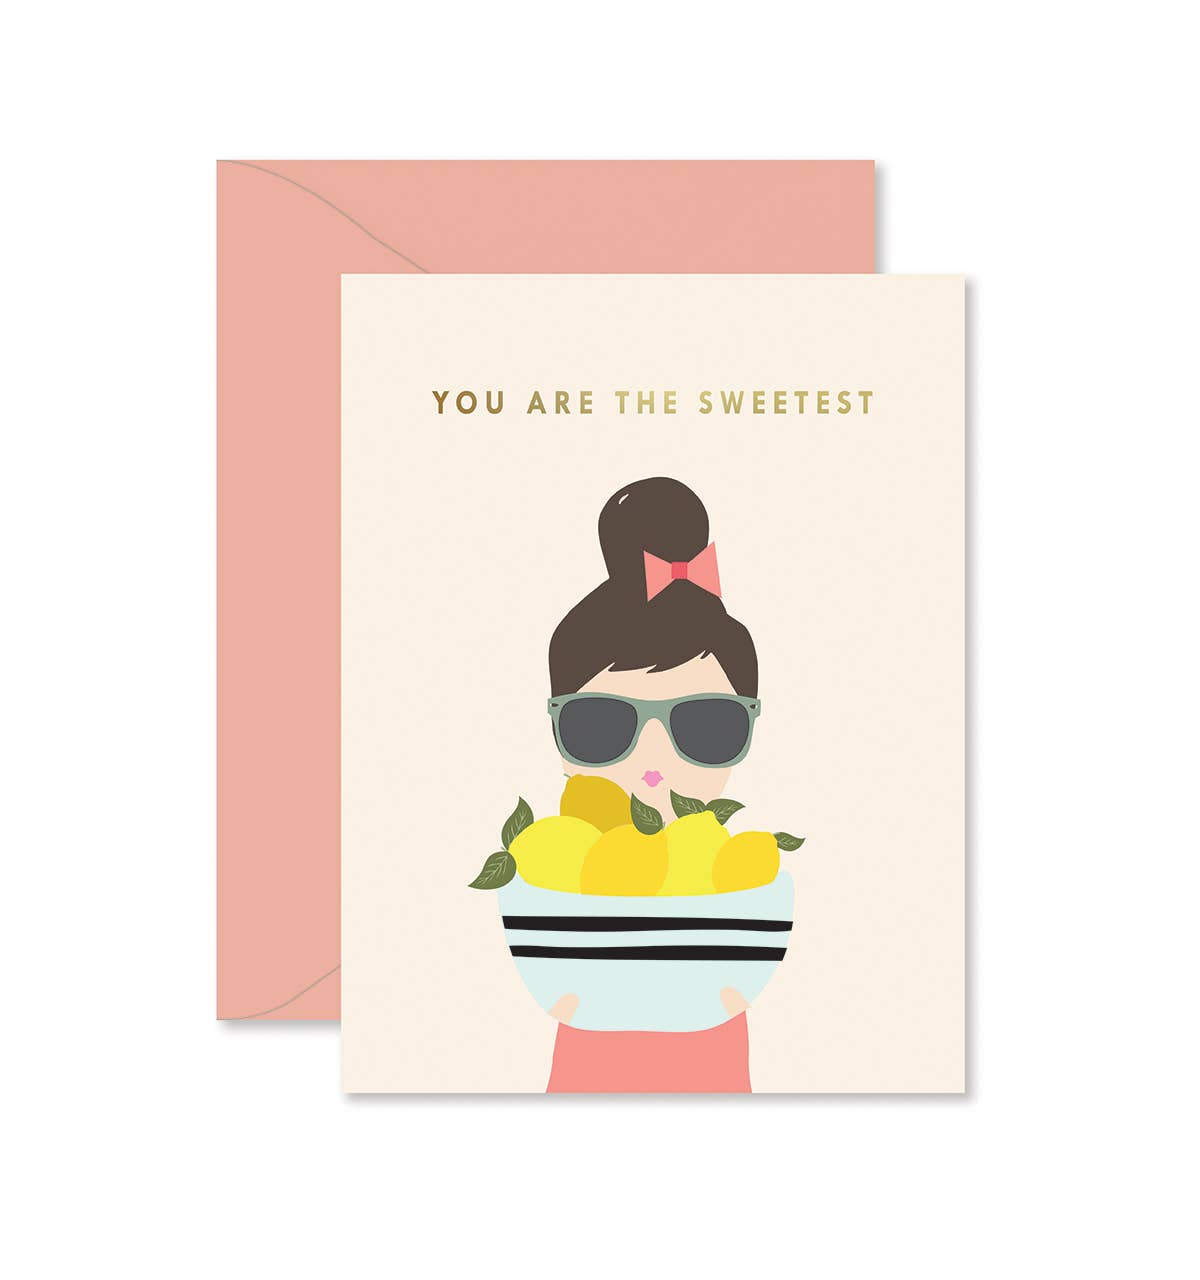 You are the sweetest Lemon Lady Thank You Card with coordinating coral envelope by Ginger P. Designs. A lady holding a bowl full of lemons. 